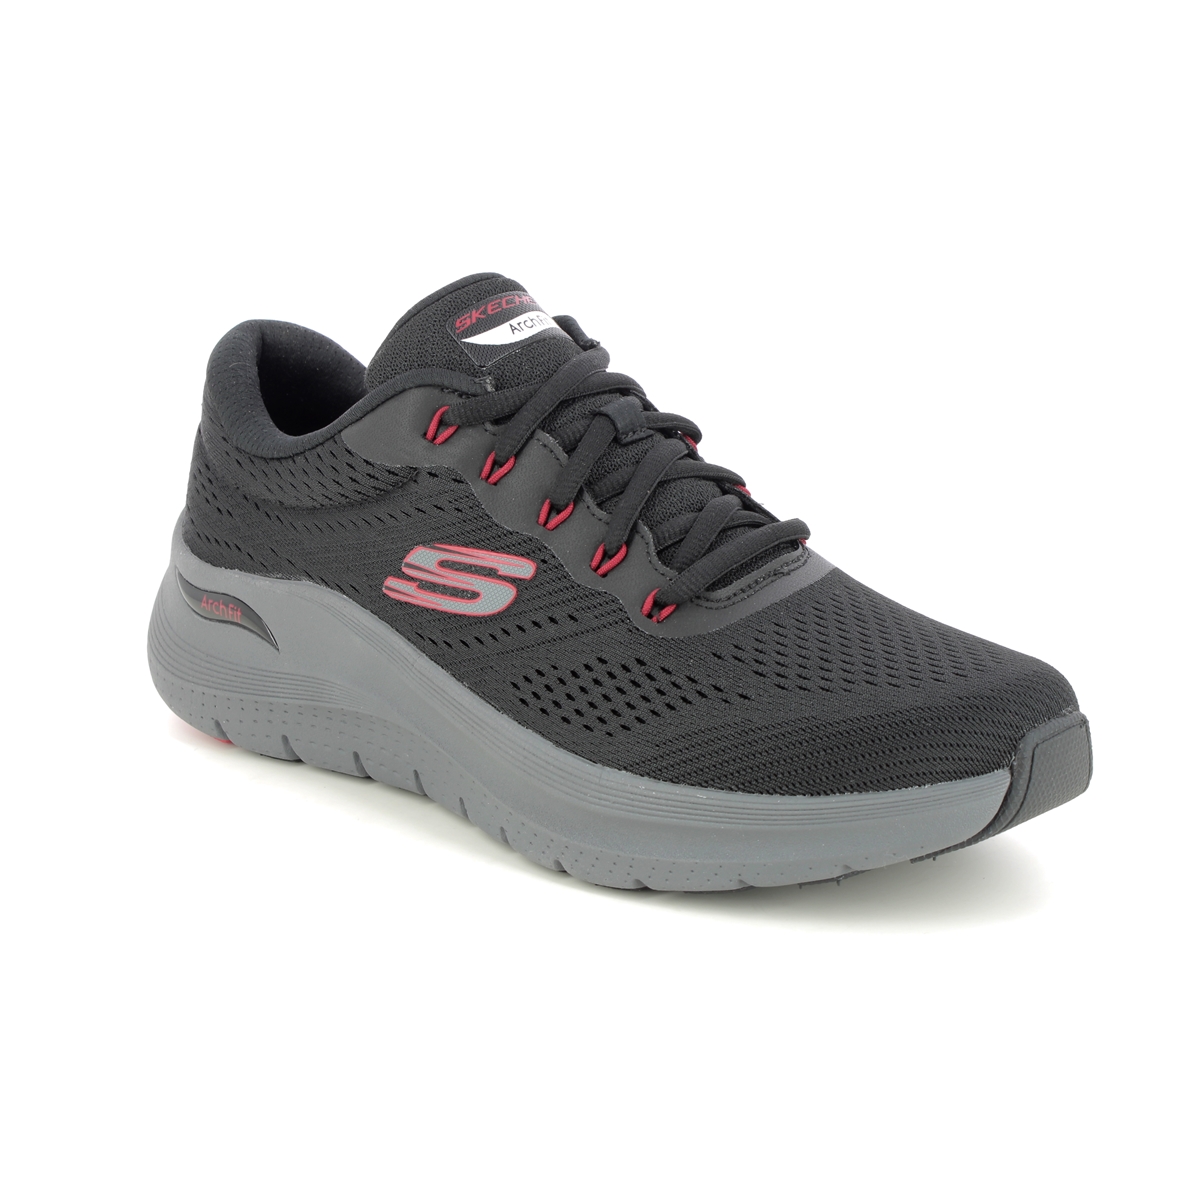 Skechers Arch Fit 2 Lace BKRD Black Red Mens trainers 232700 in a Plain Textile in Size 11